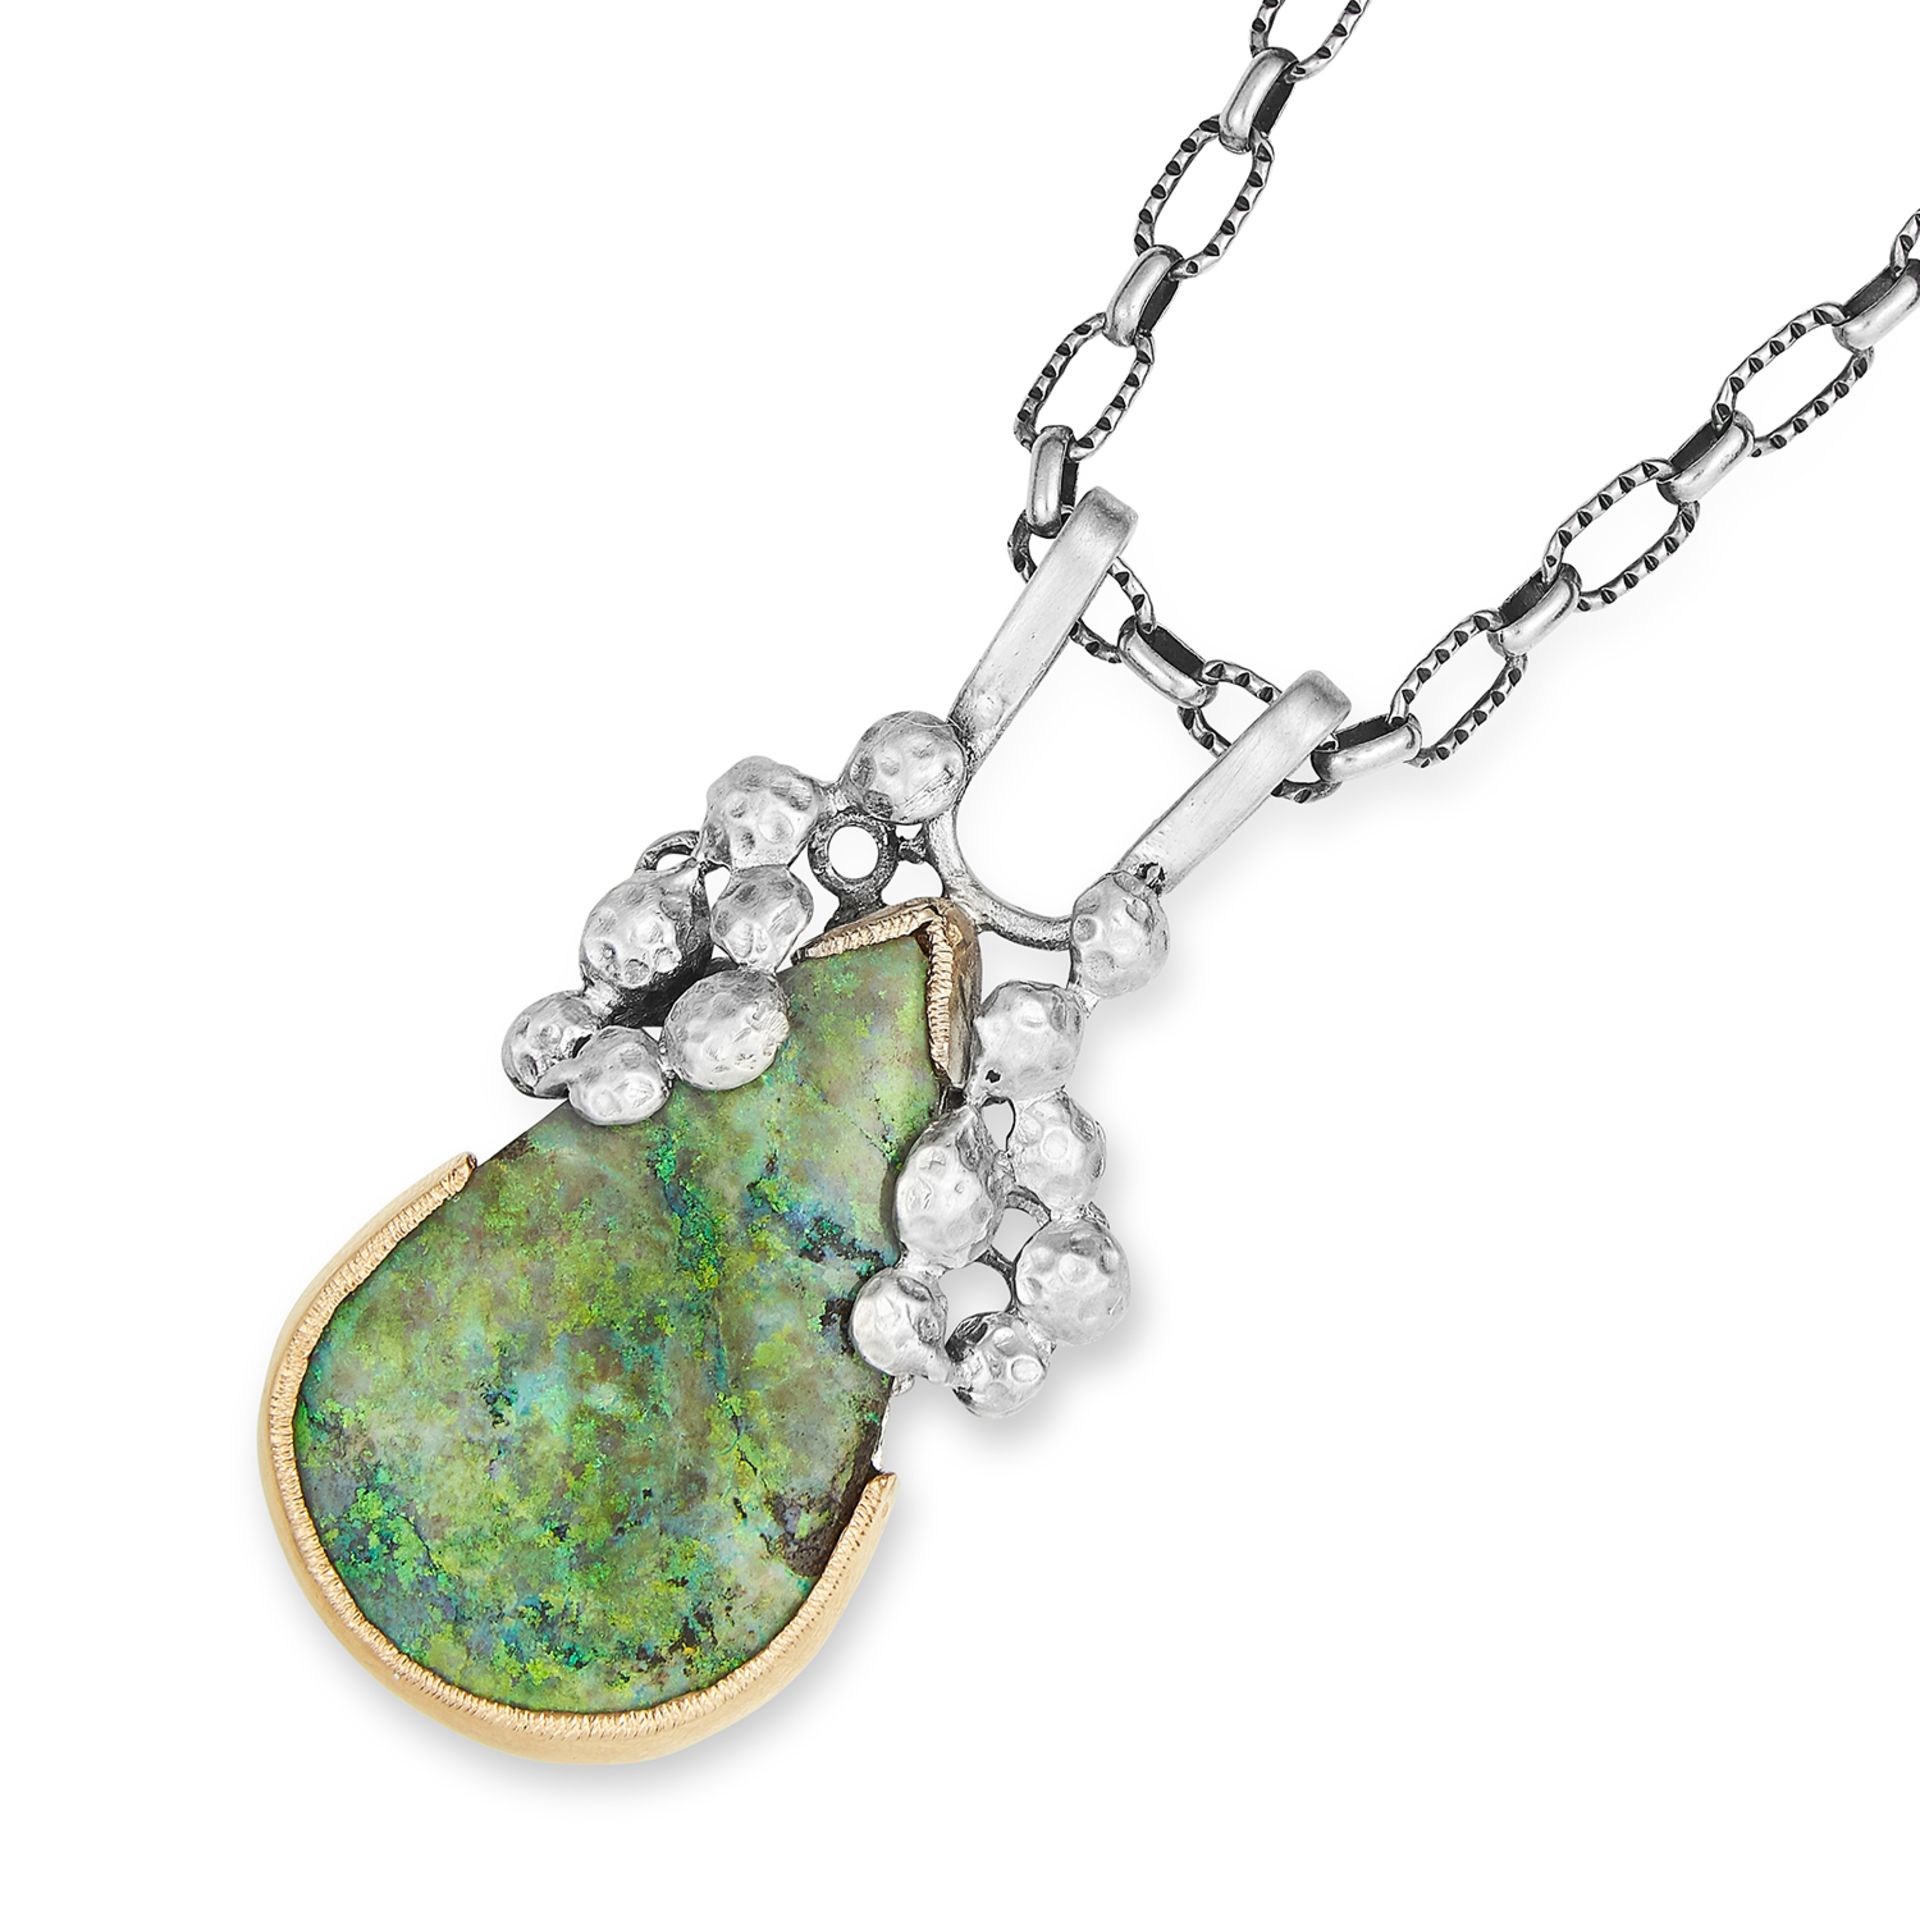 ABSTRACT OPAL PENDANT NECKLACE in silver, set with a 21.69 carat pear cut opal, stamped 935,